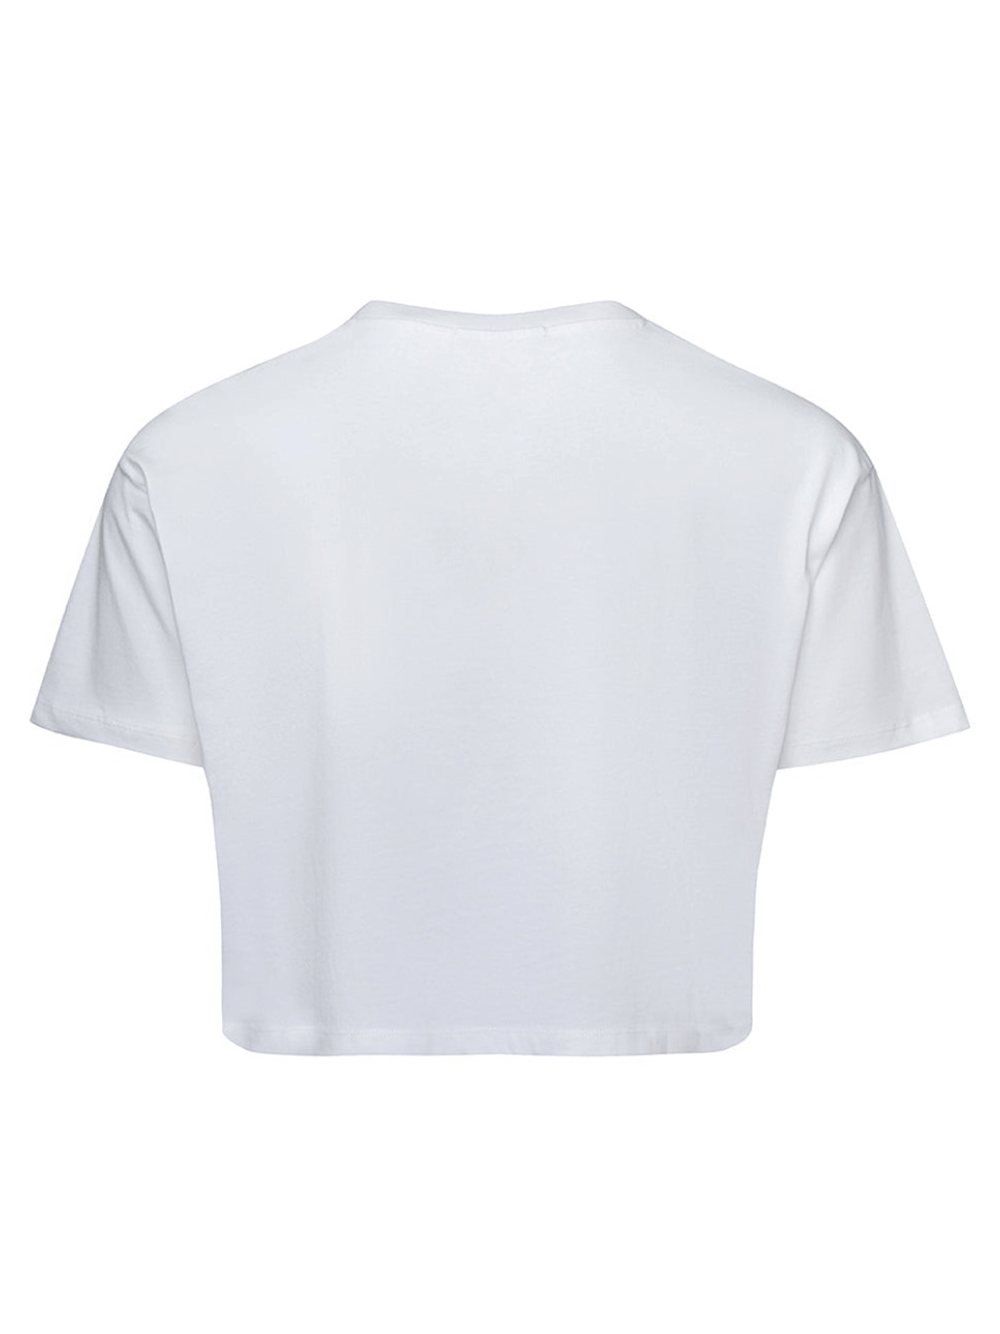 Black-Score-Cropped-T-Shirt-Essentials-Really-White-2